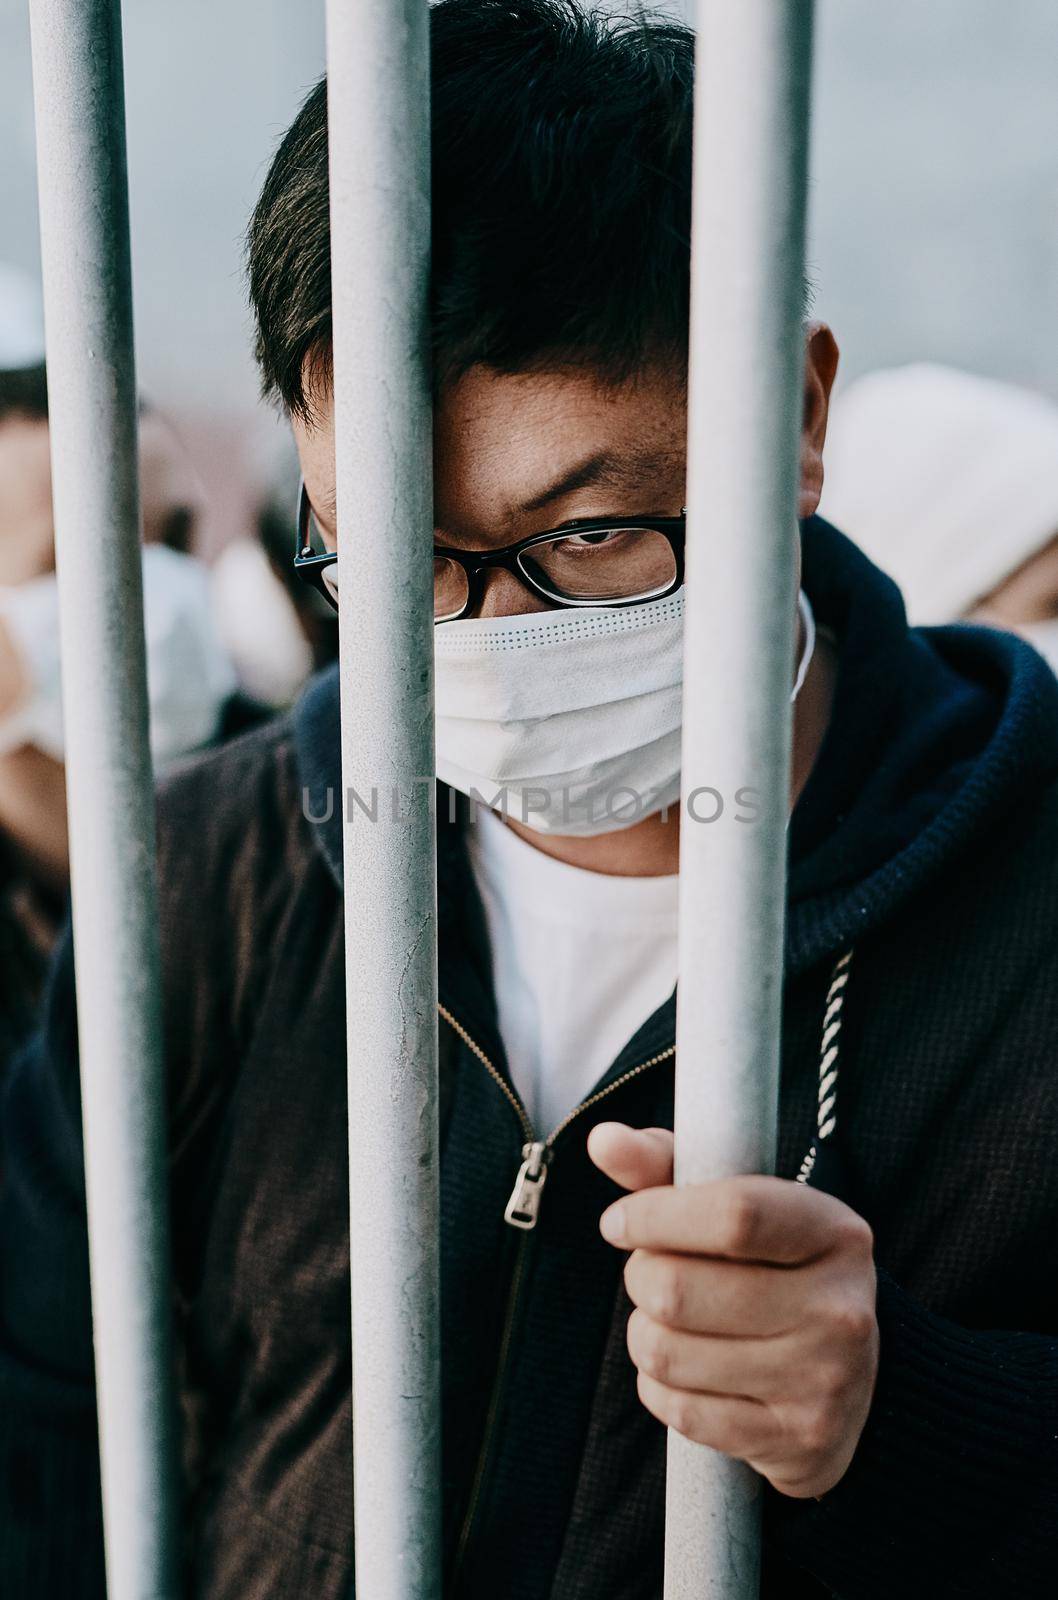 Lockdown, isolation and covid travel ban with a man in a mask behind bars during an international pandemic. Corona virus restrictions, feeling like a prisoner or captive during a global shutdown by YuriArcurs